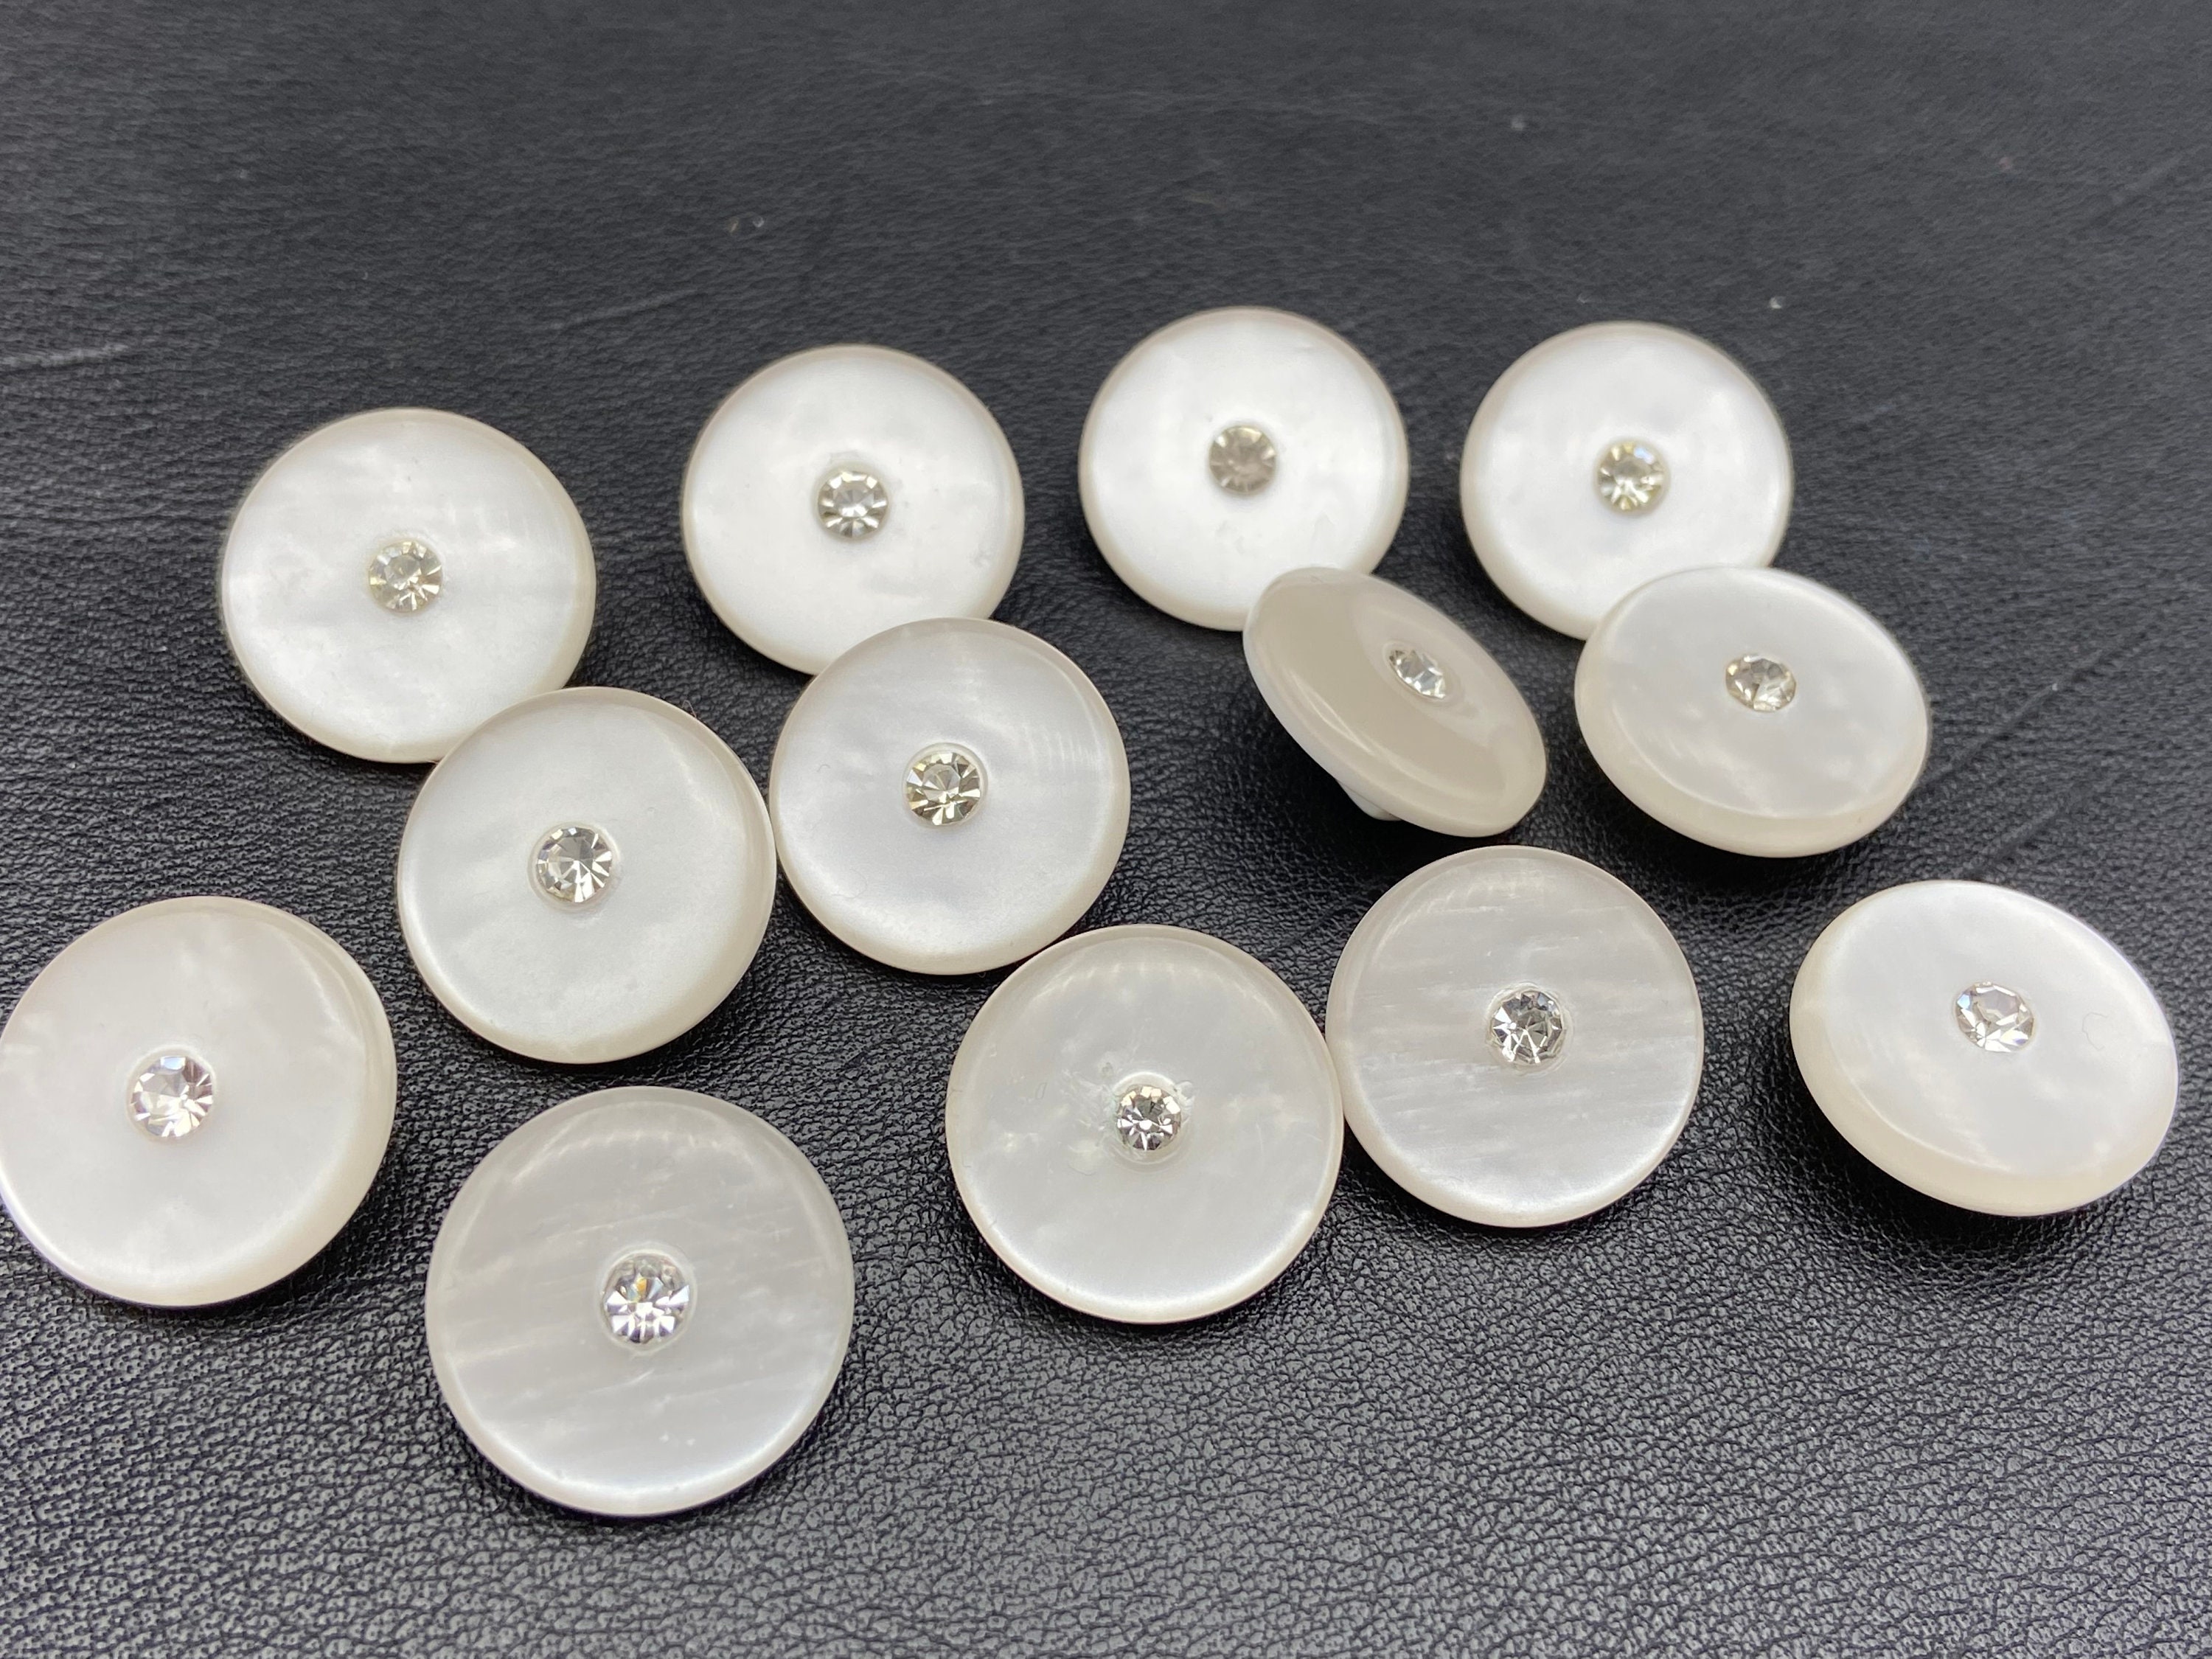 Vintage Mother of Pearl Buttons, Lot of 50 Antique Sewing Buttons